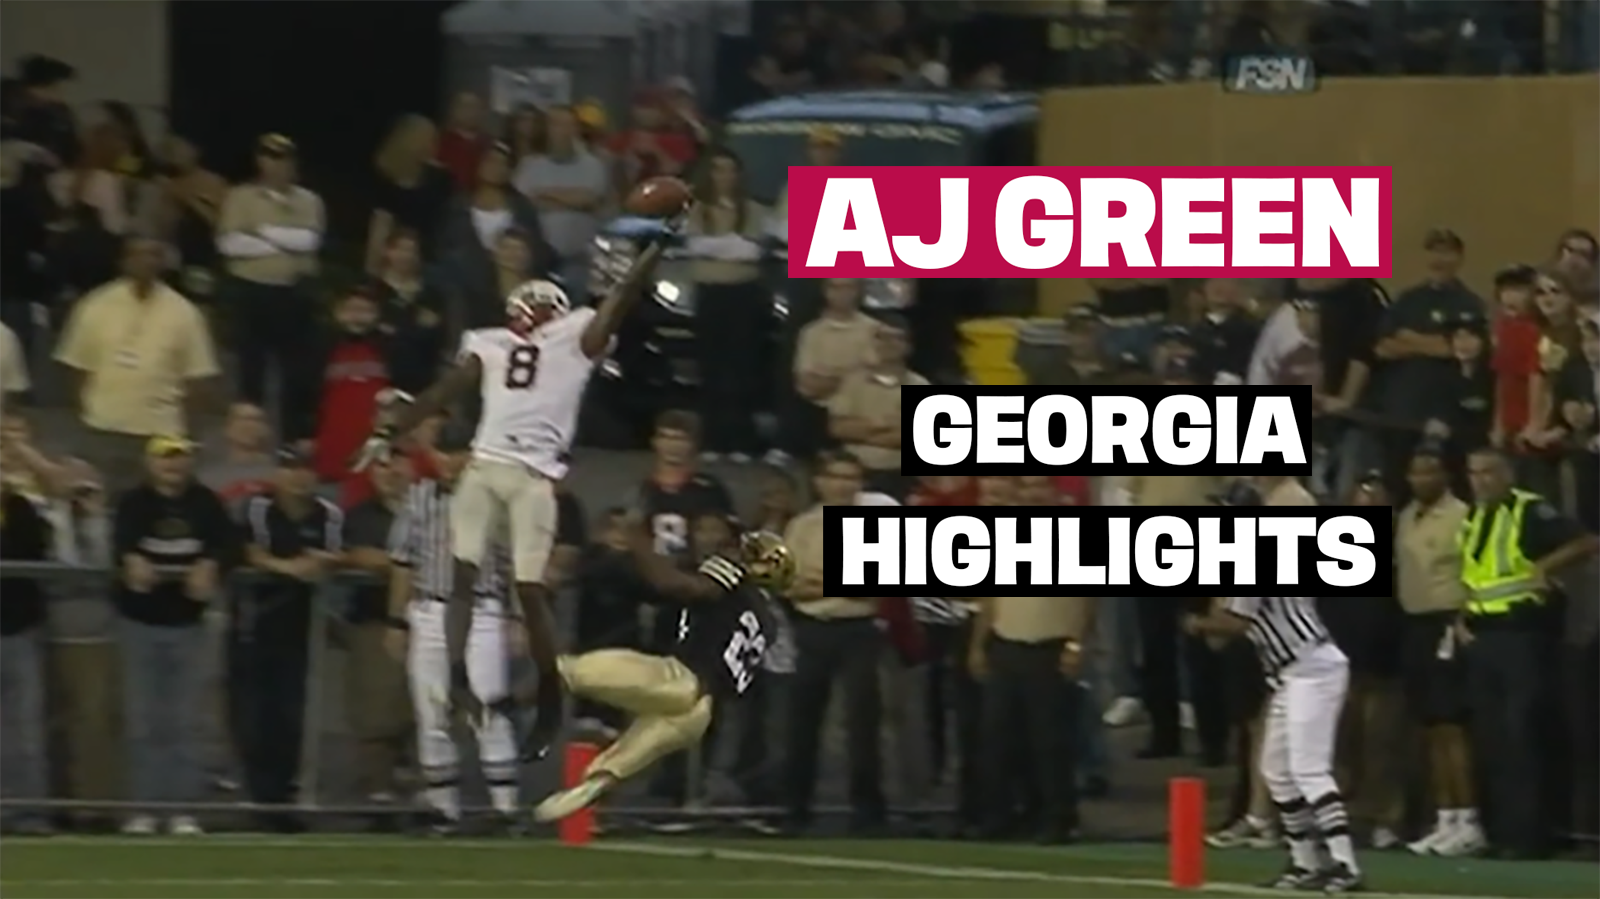 Video: AJ Green Georgia highlights in case you need a refresher on how legendary he was